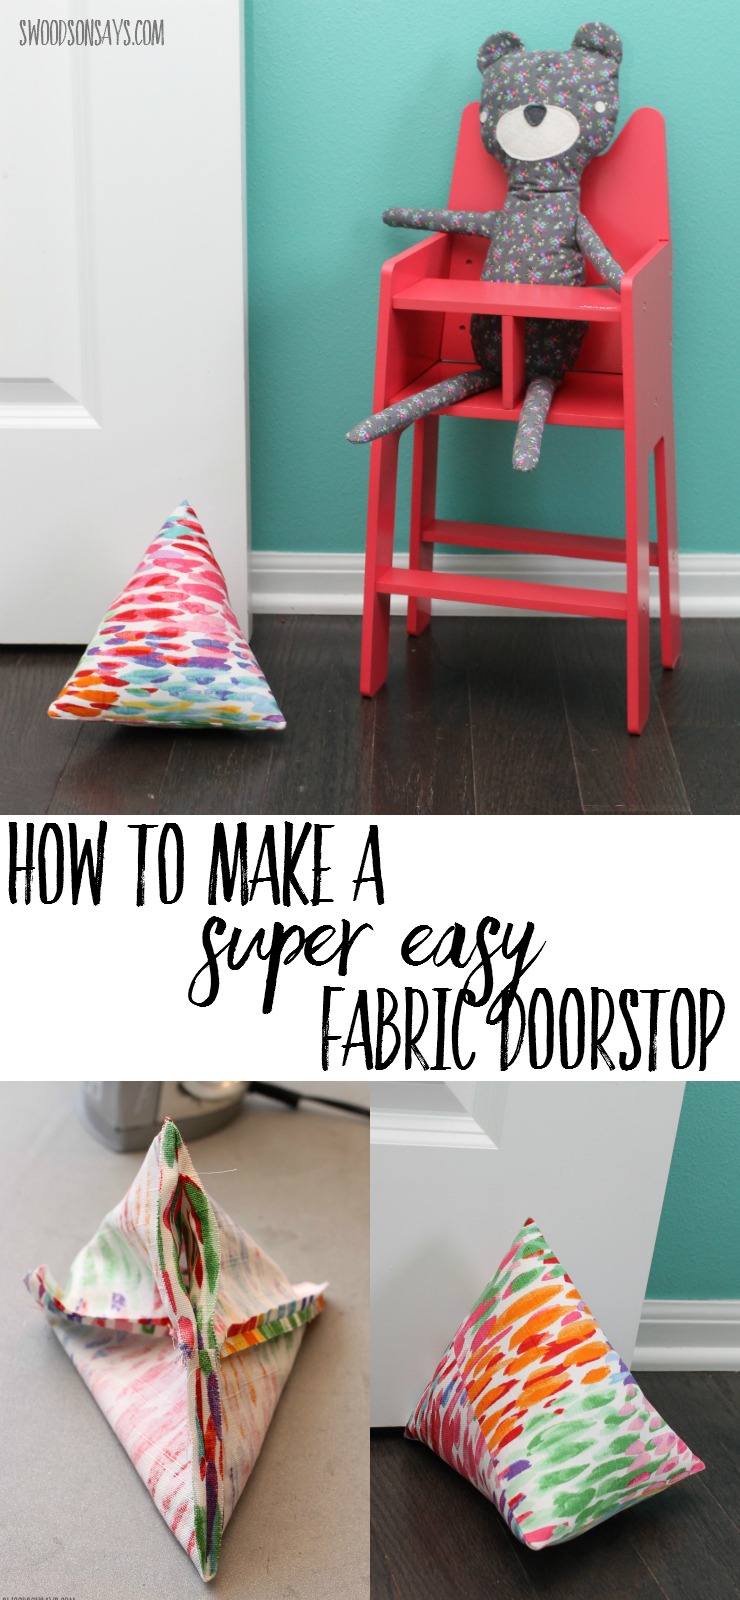 How to make a doorstop from fabric! This is a super easy sewing tutorial for beginners, all it takes is a few straight lines and maybe half an hour. Customize the fabric to your decor or use it as a project for kids to sew themselves!